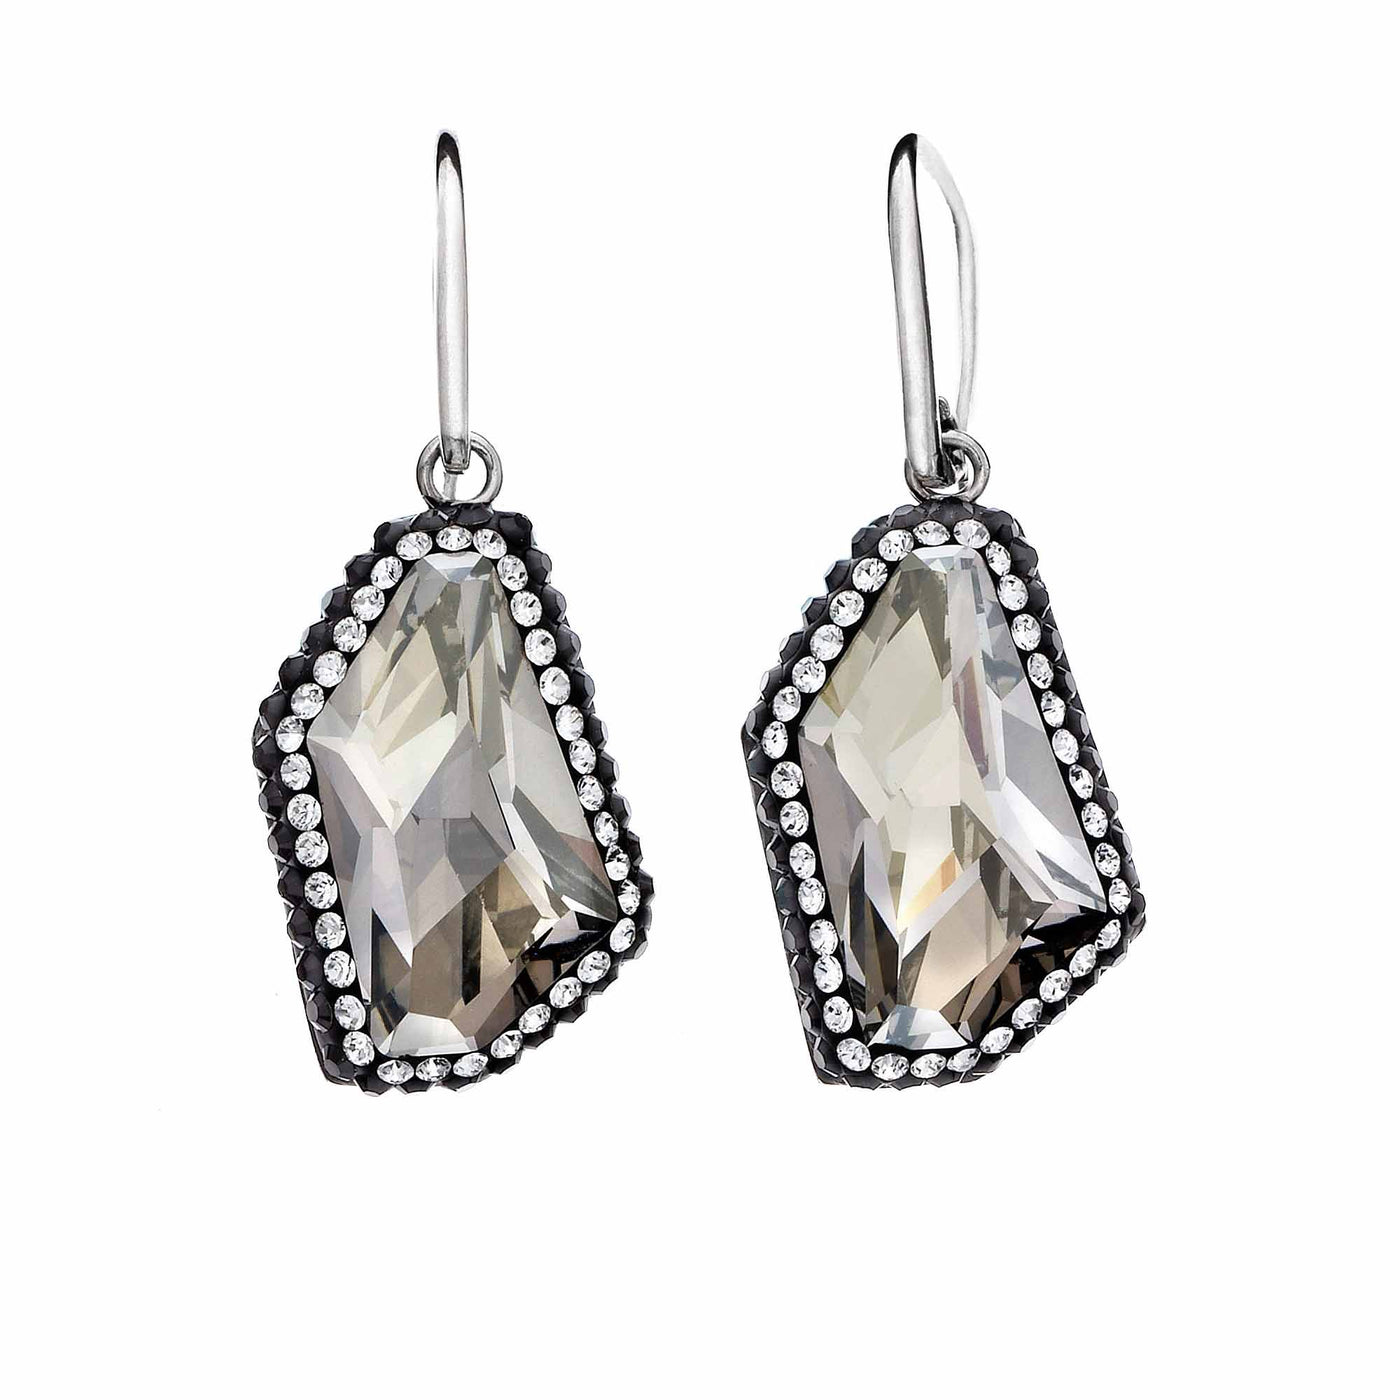 Rebecca Sloane Silver Asymmetrical Crystal With Pave Earring